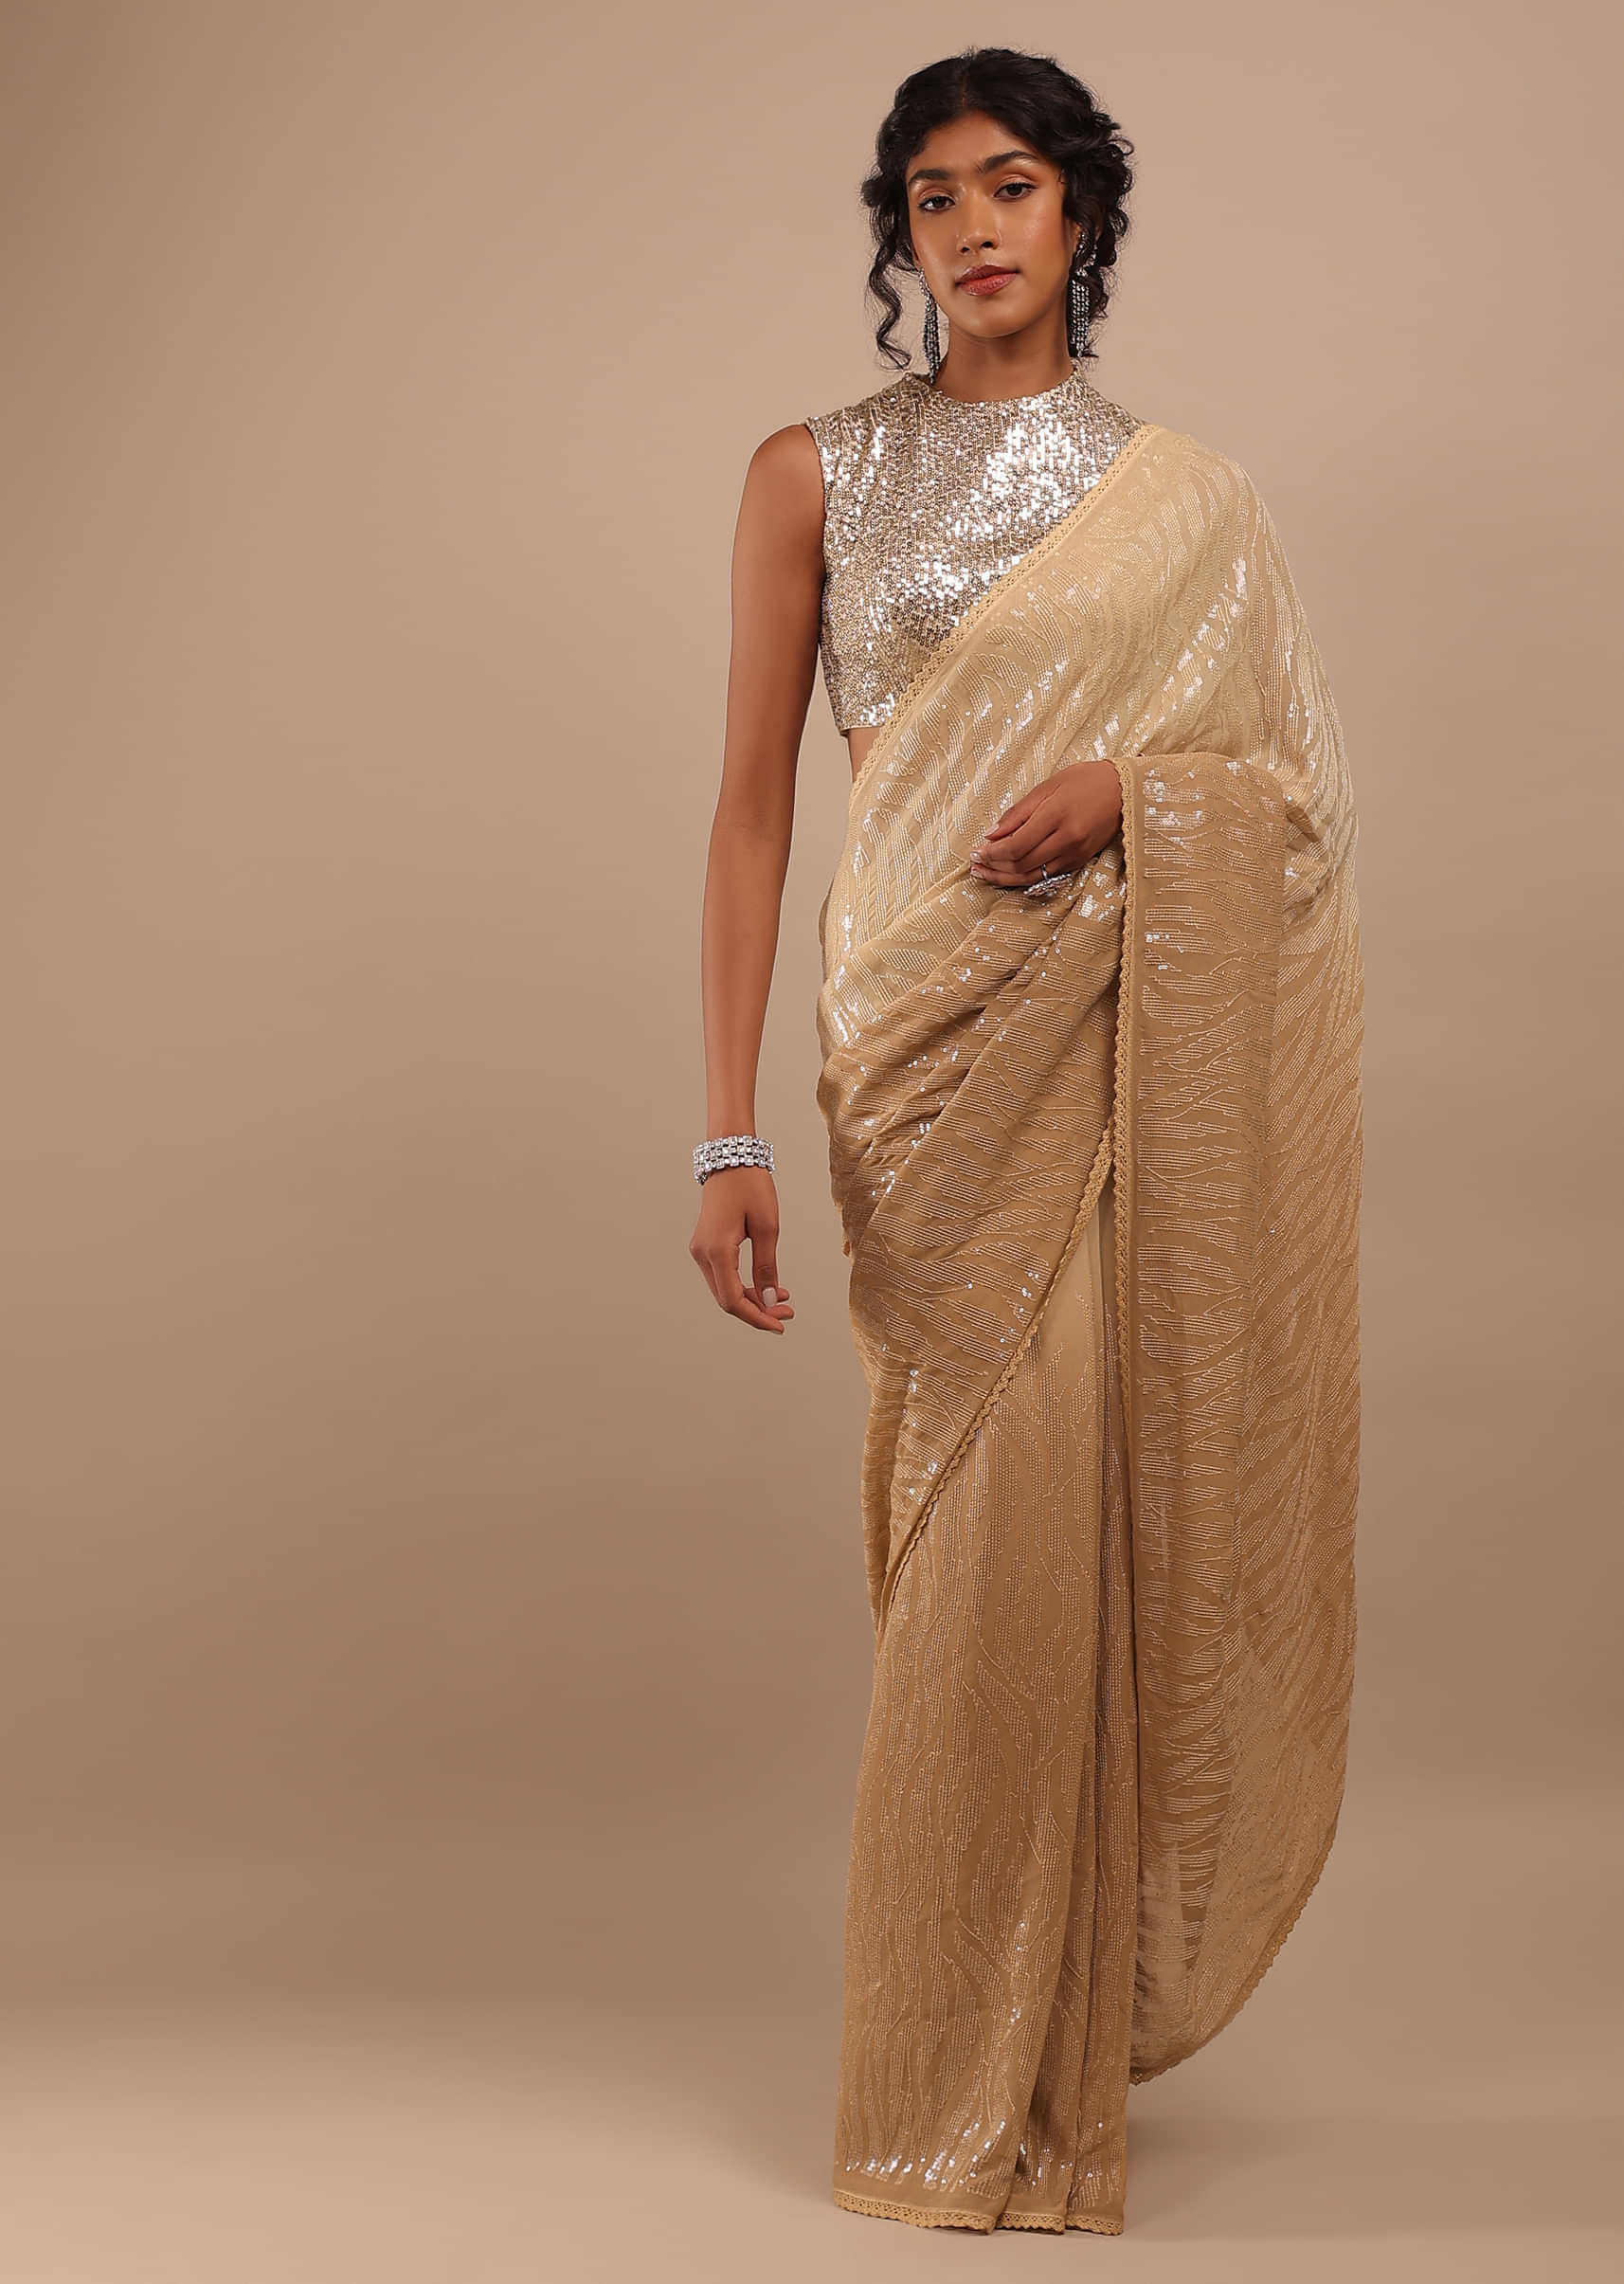 Tan Gold Sequins And Lucknowi Embroidery Saree In Georgette With Lacework On The Border